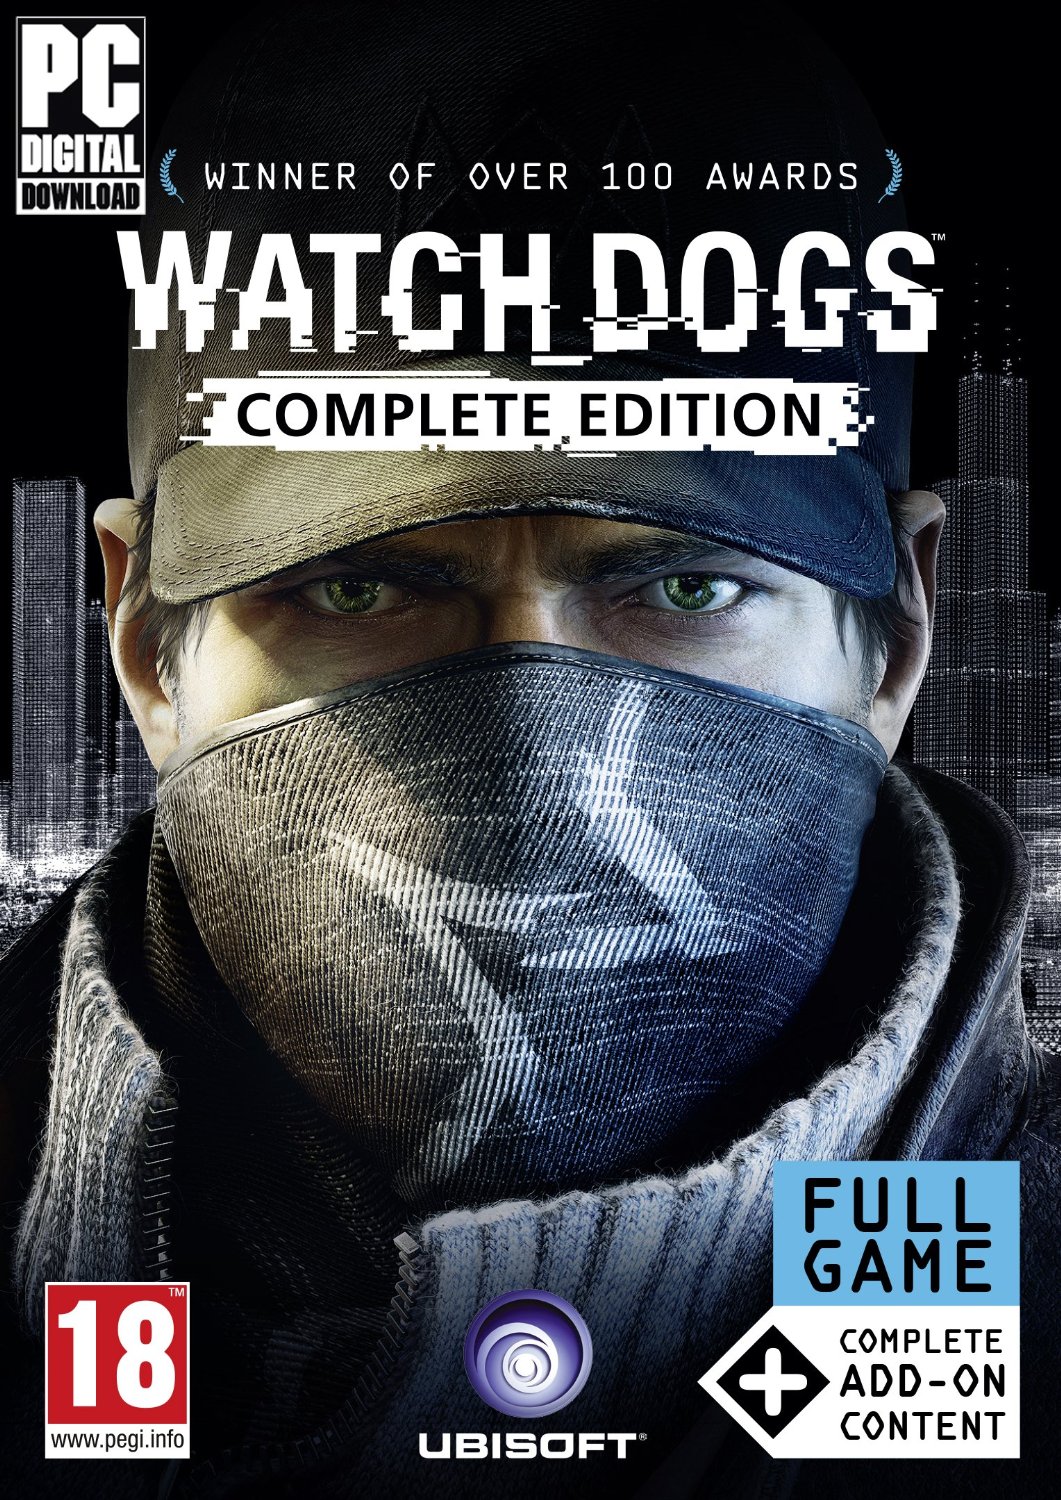 Watch Dogs Complete Edition (PC), Ubisoft Montreal